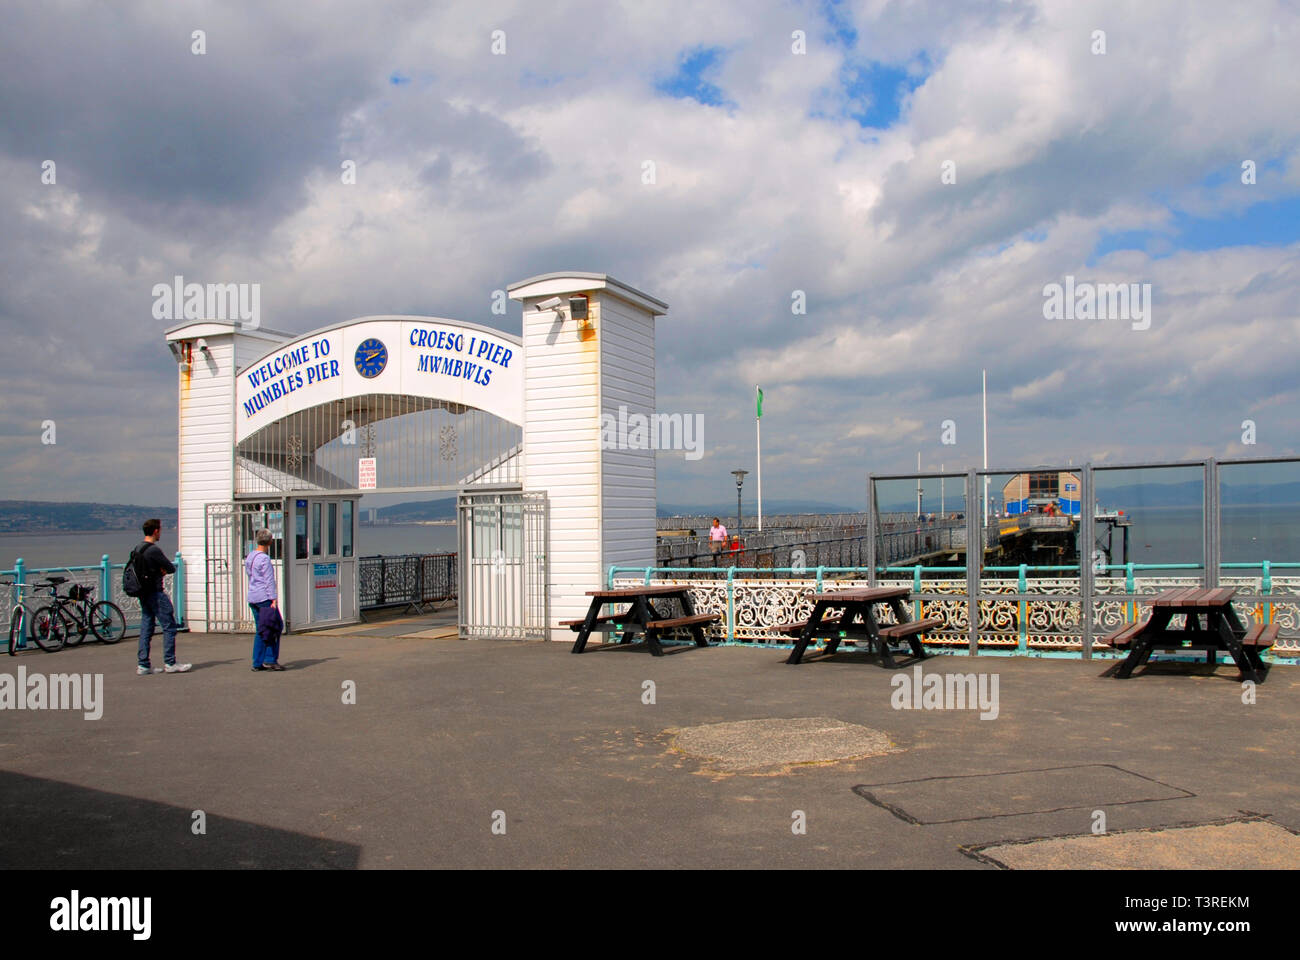 Entrance to Mumbles pier, south Wales Stock Photo